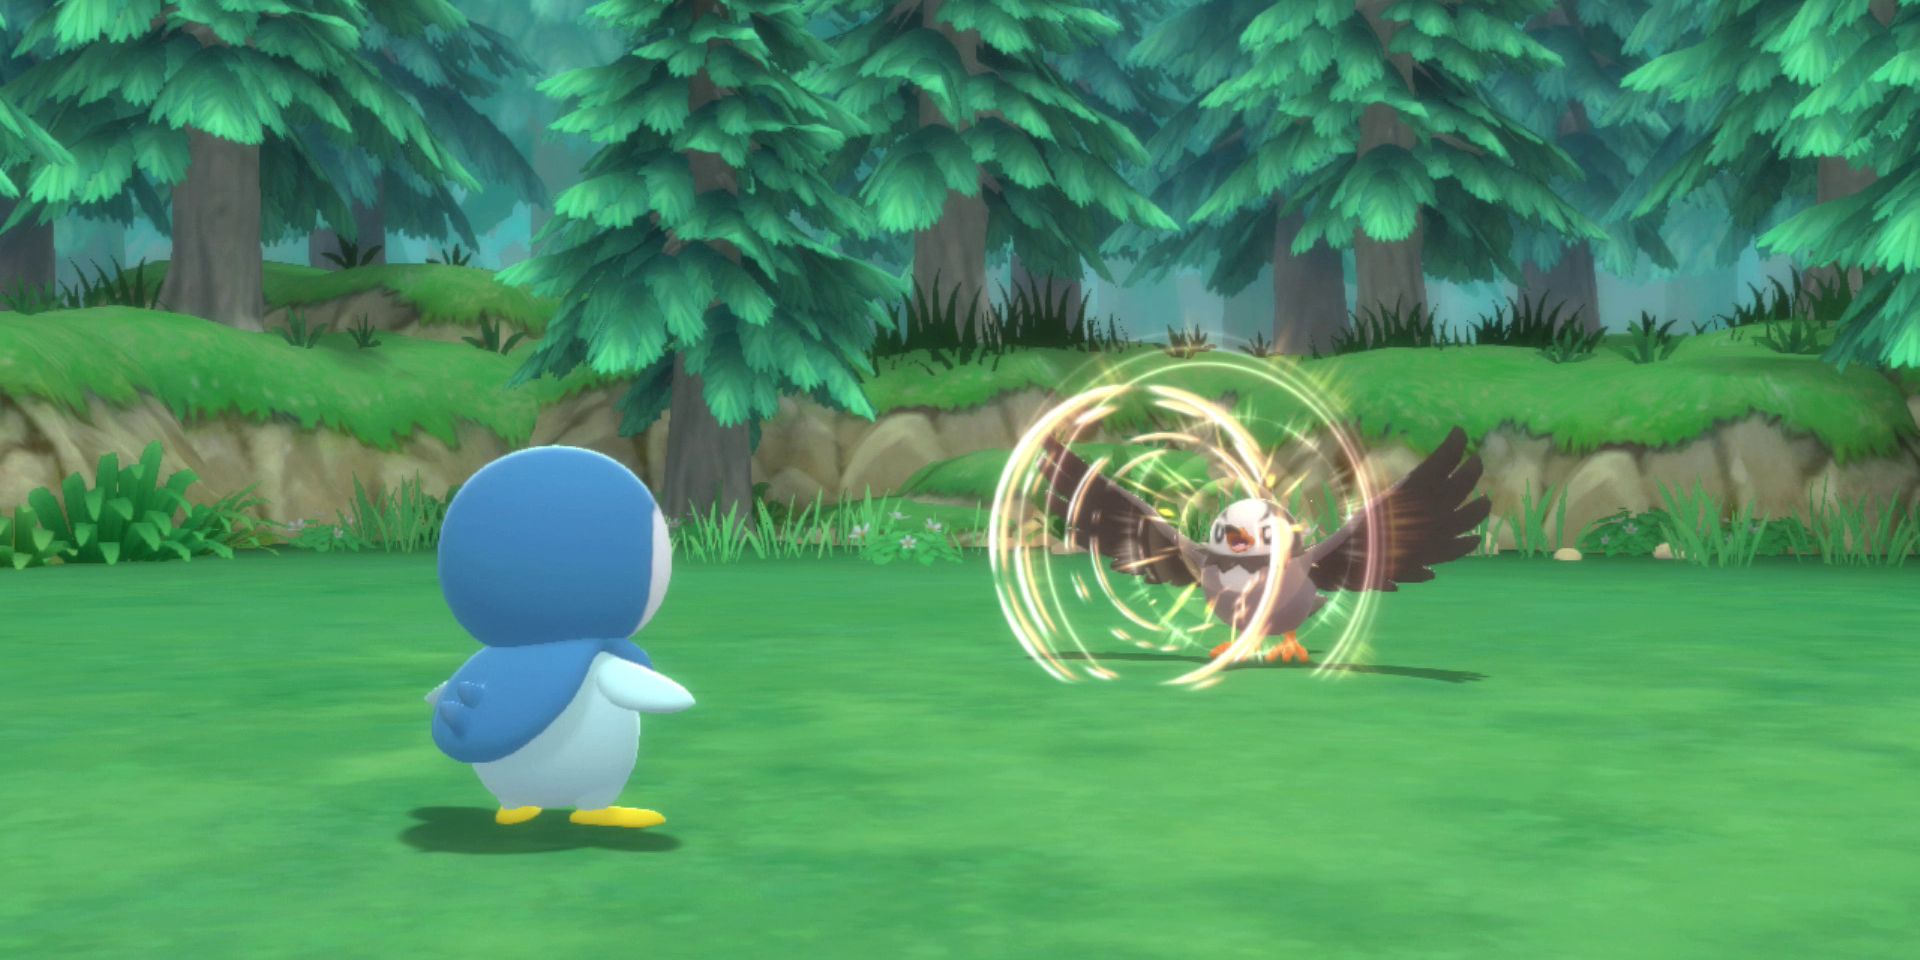 Piplup versus Starly